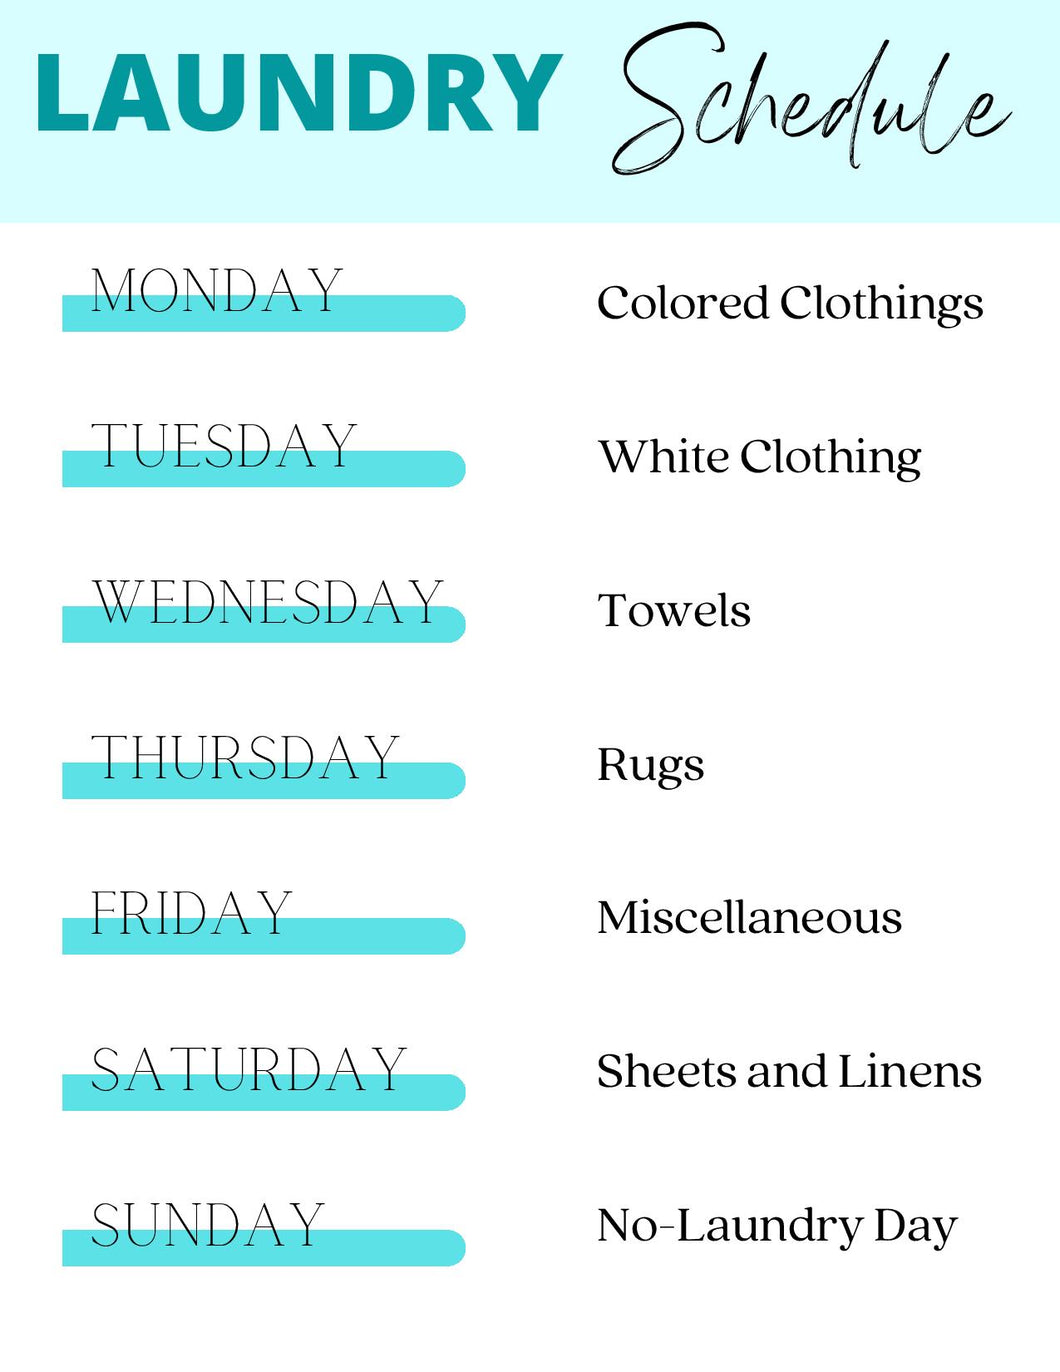 Laundry Schedule and Frequency